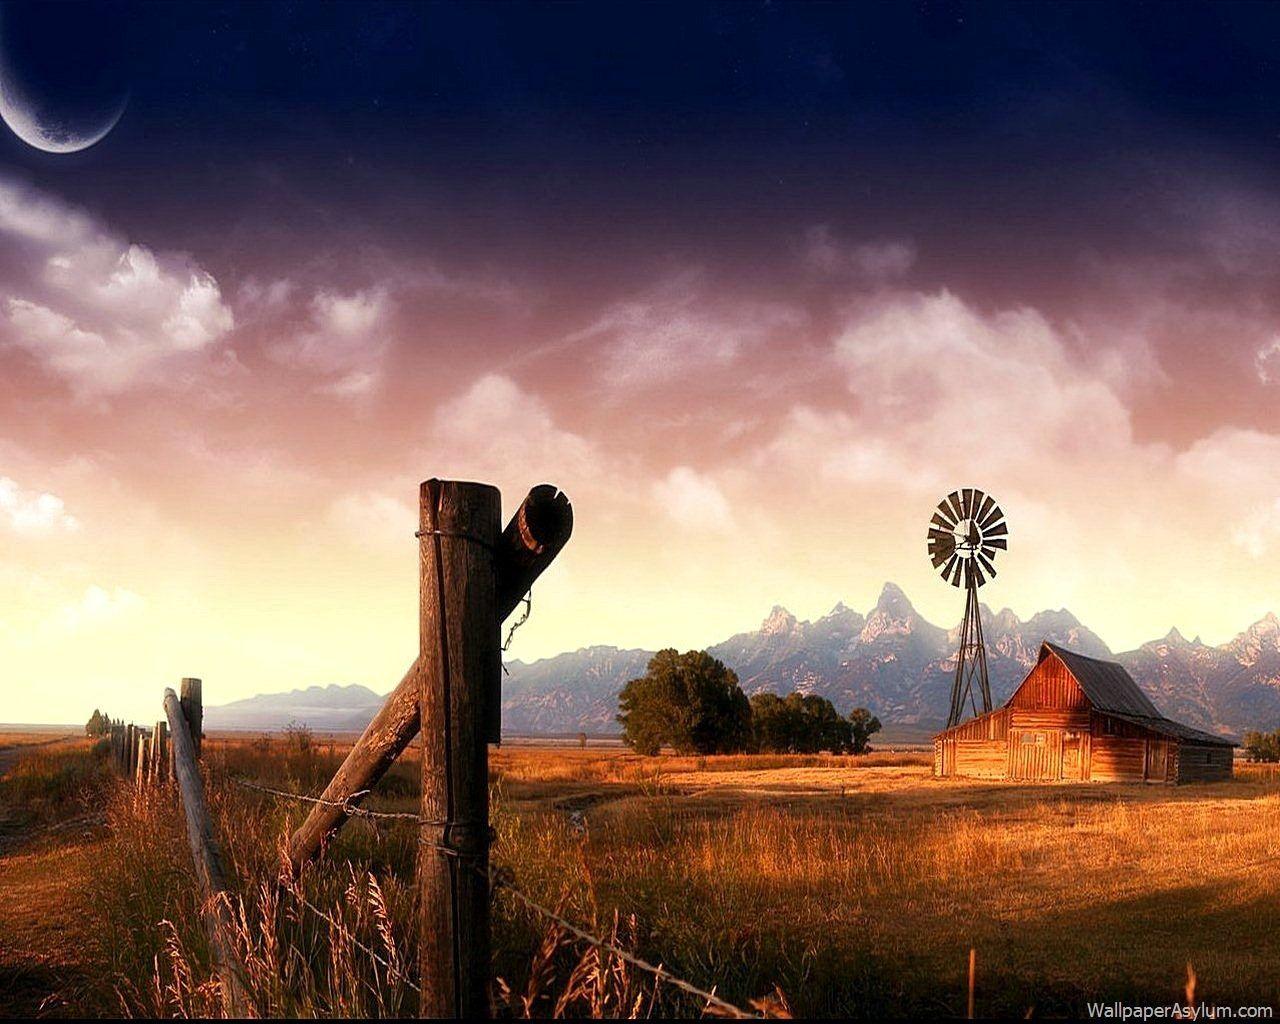 country background. If you like country life, check out